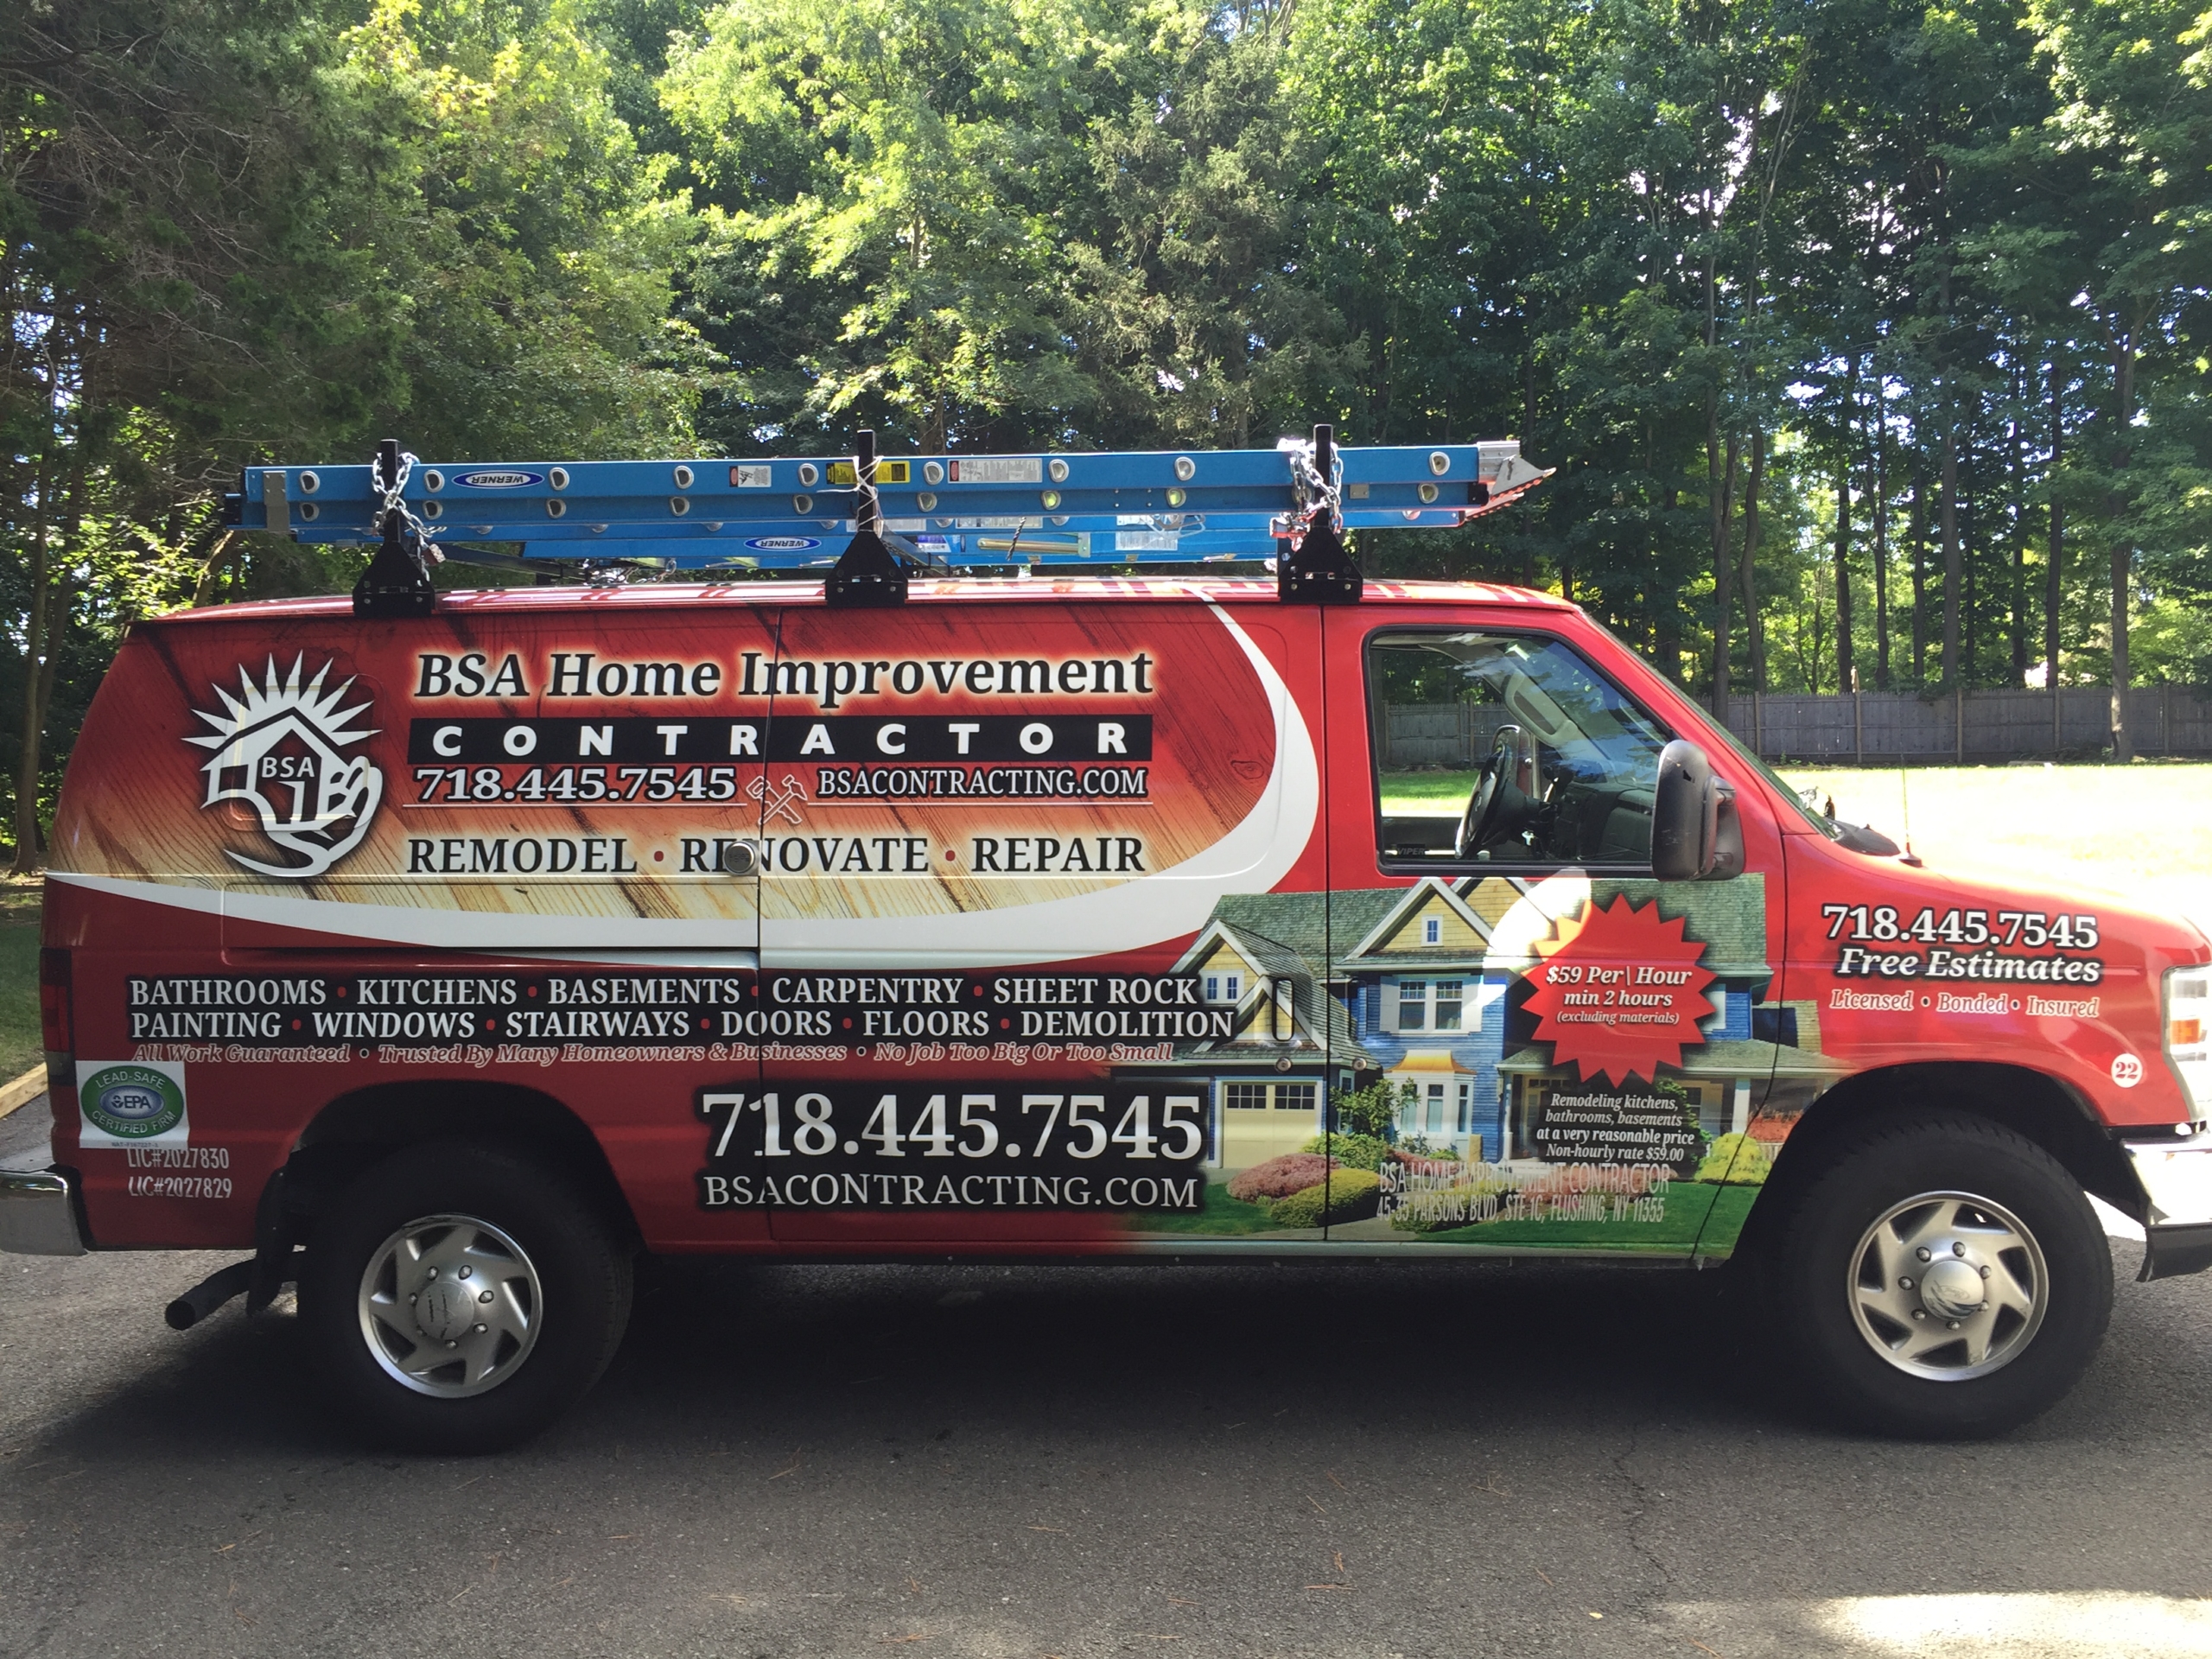 BSA Home Improvement Contractor / Handyman S Corp.       Flushing N Y, (718) 445-7545